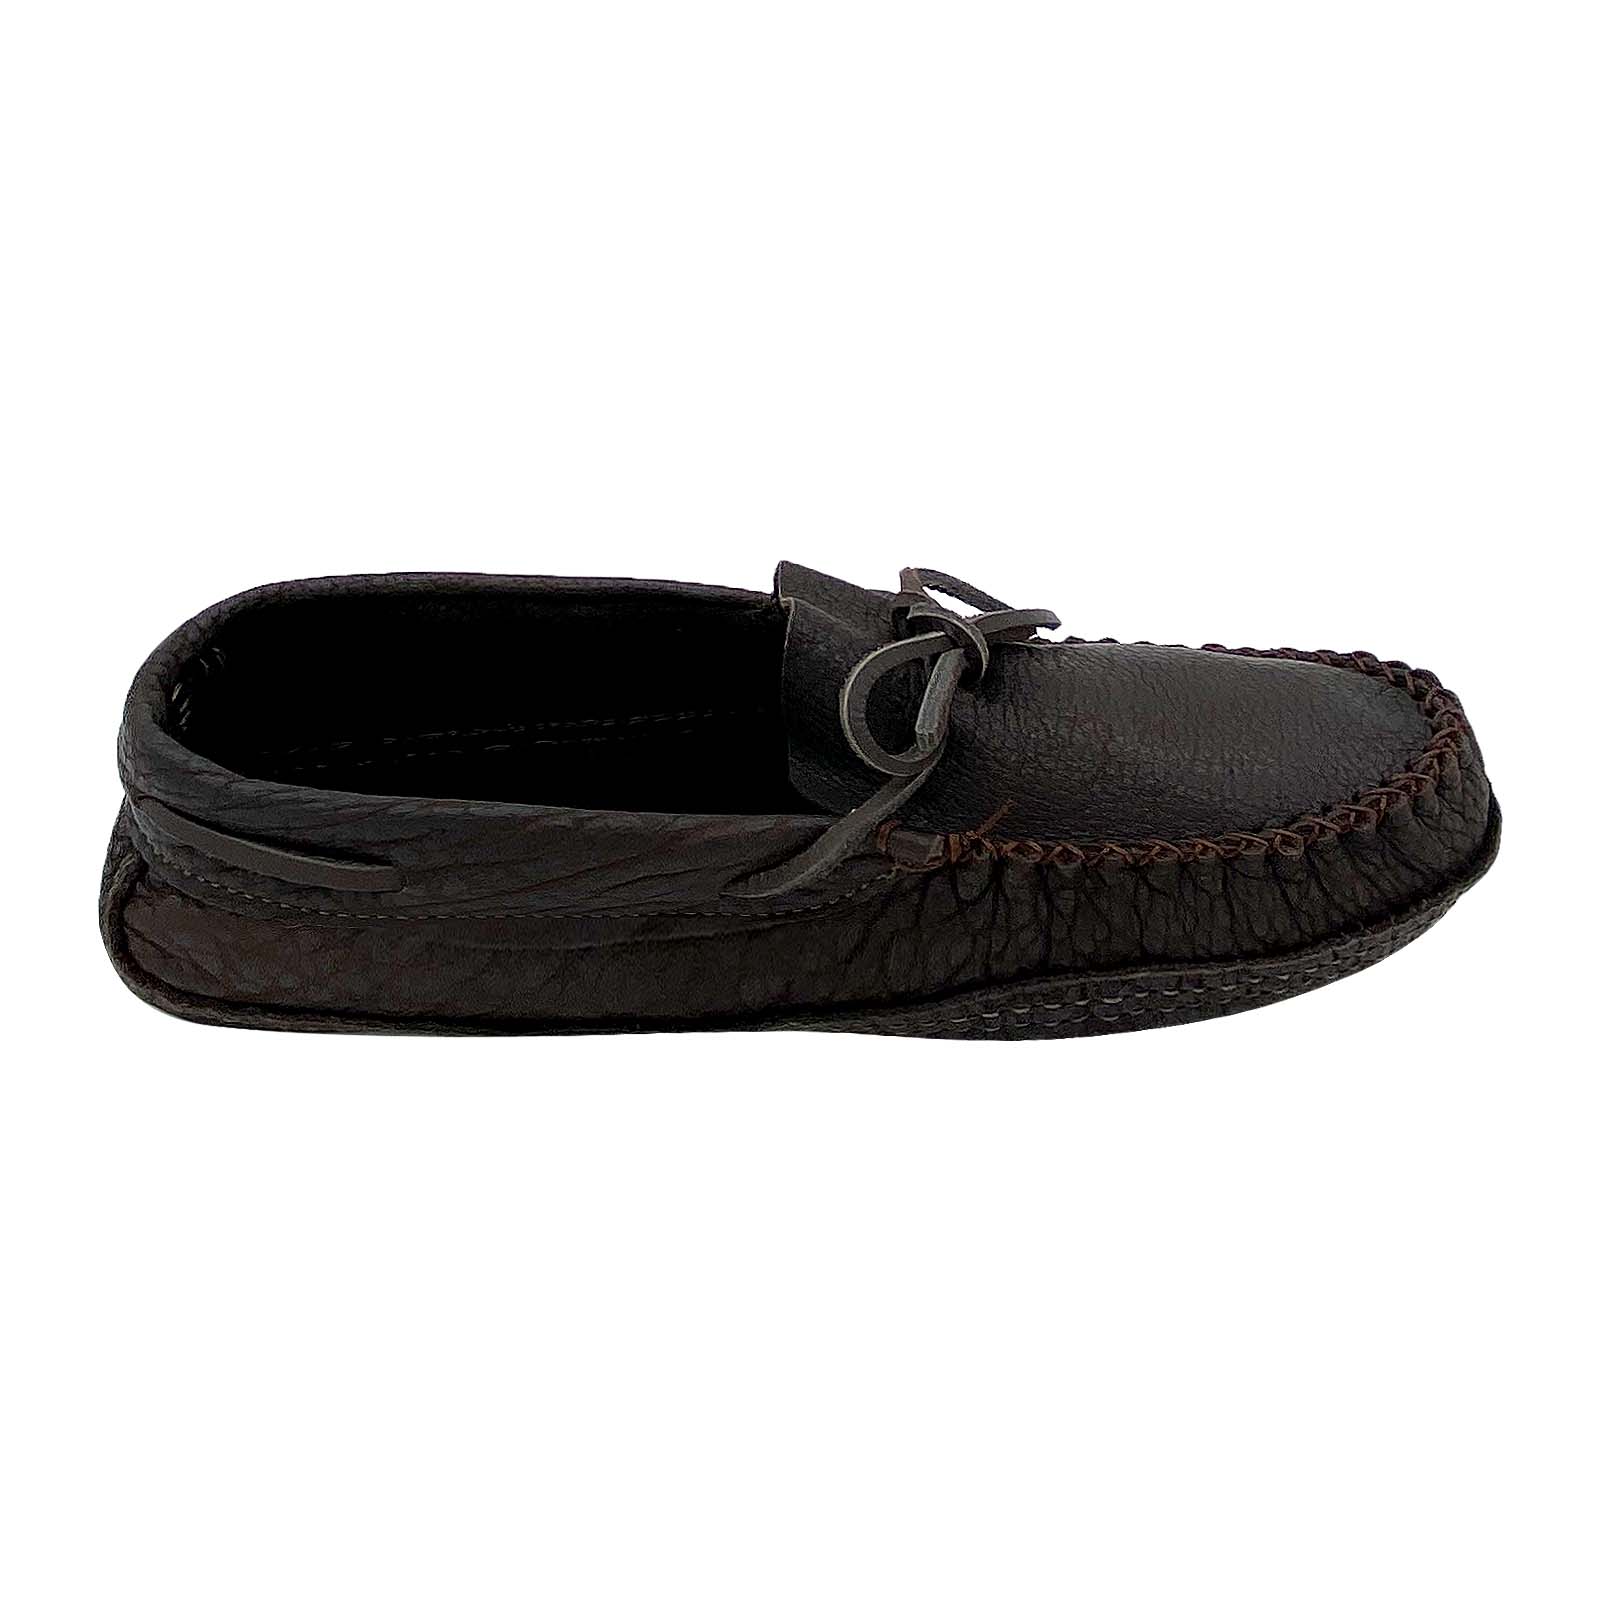 Men's Wide Buffalo Leather Moccasins